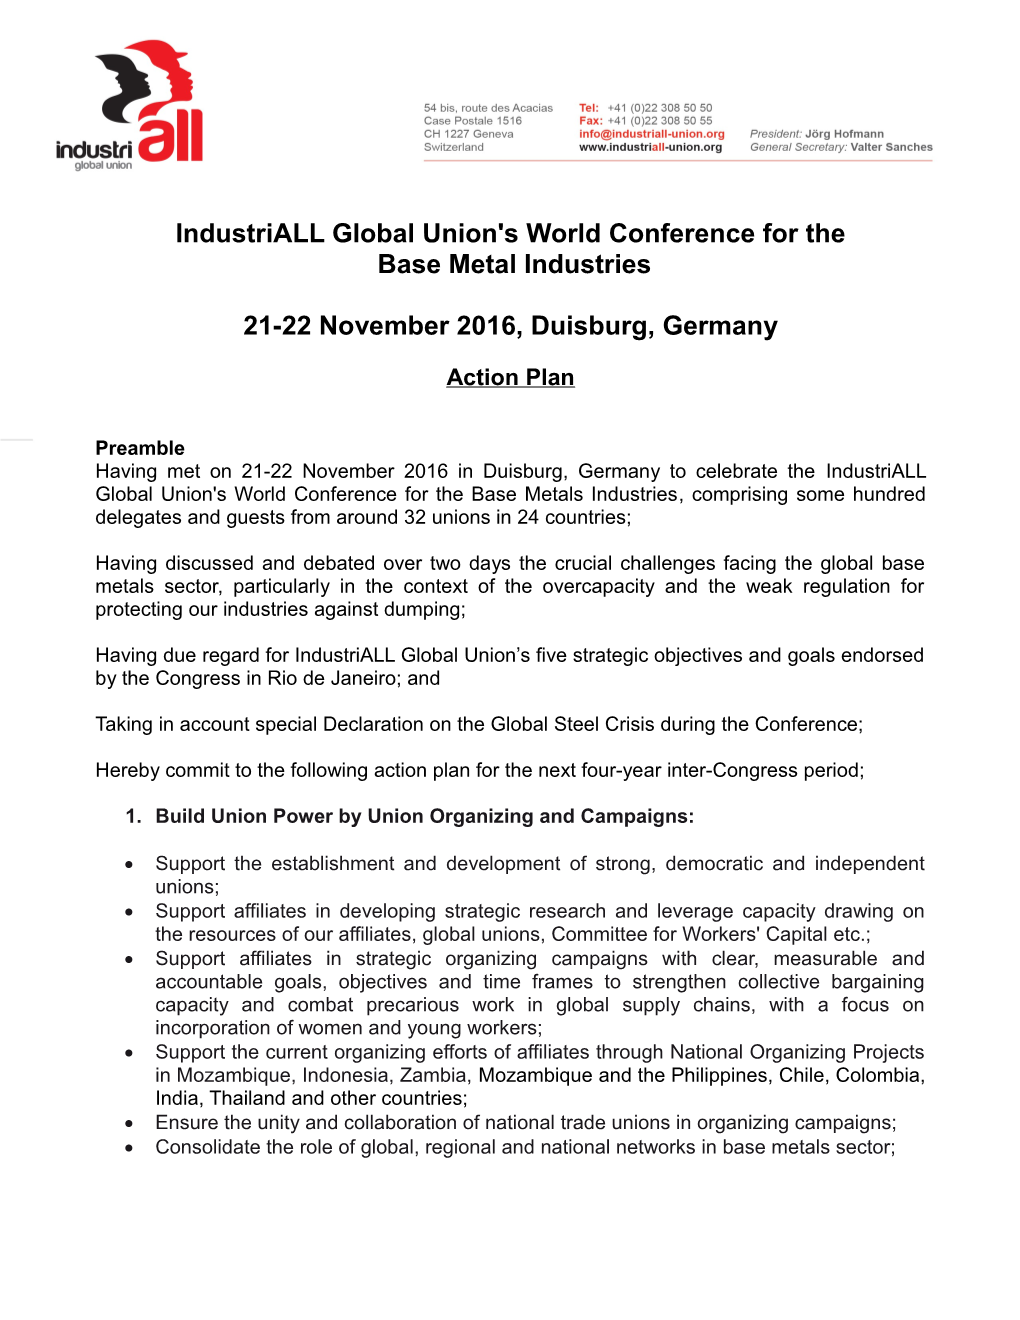 Industriall Global Union's World Conference for the Mining and DGOJP Industries